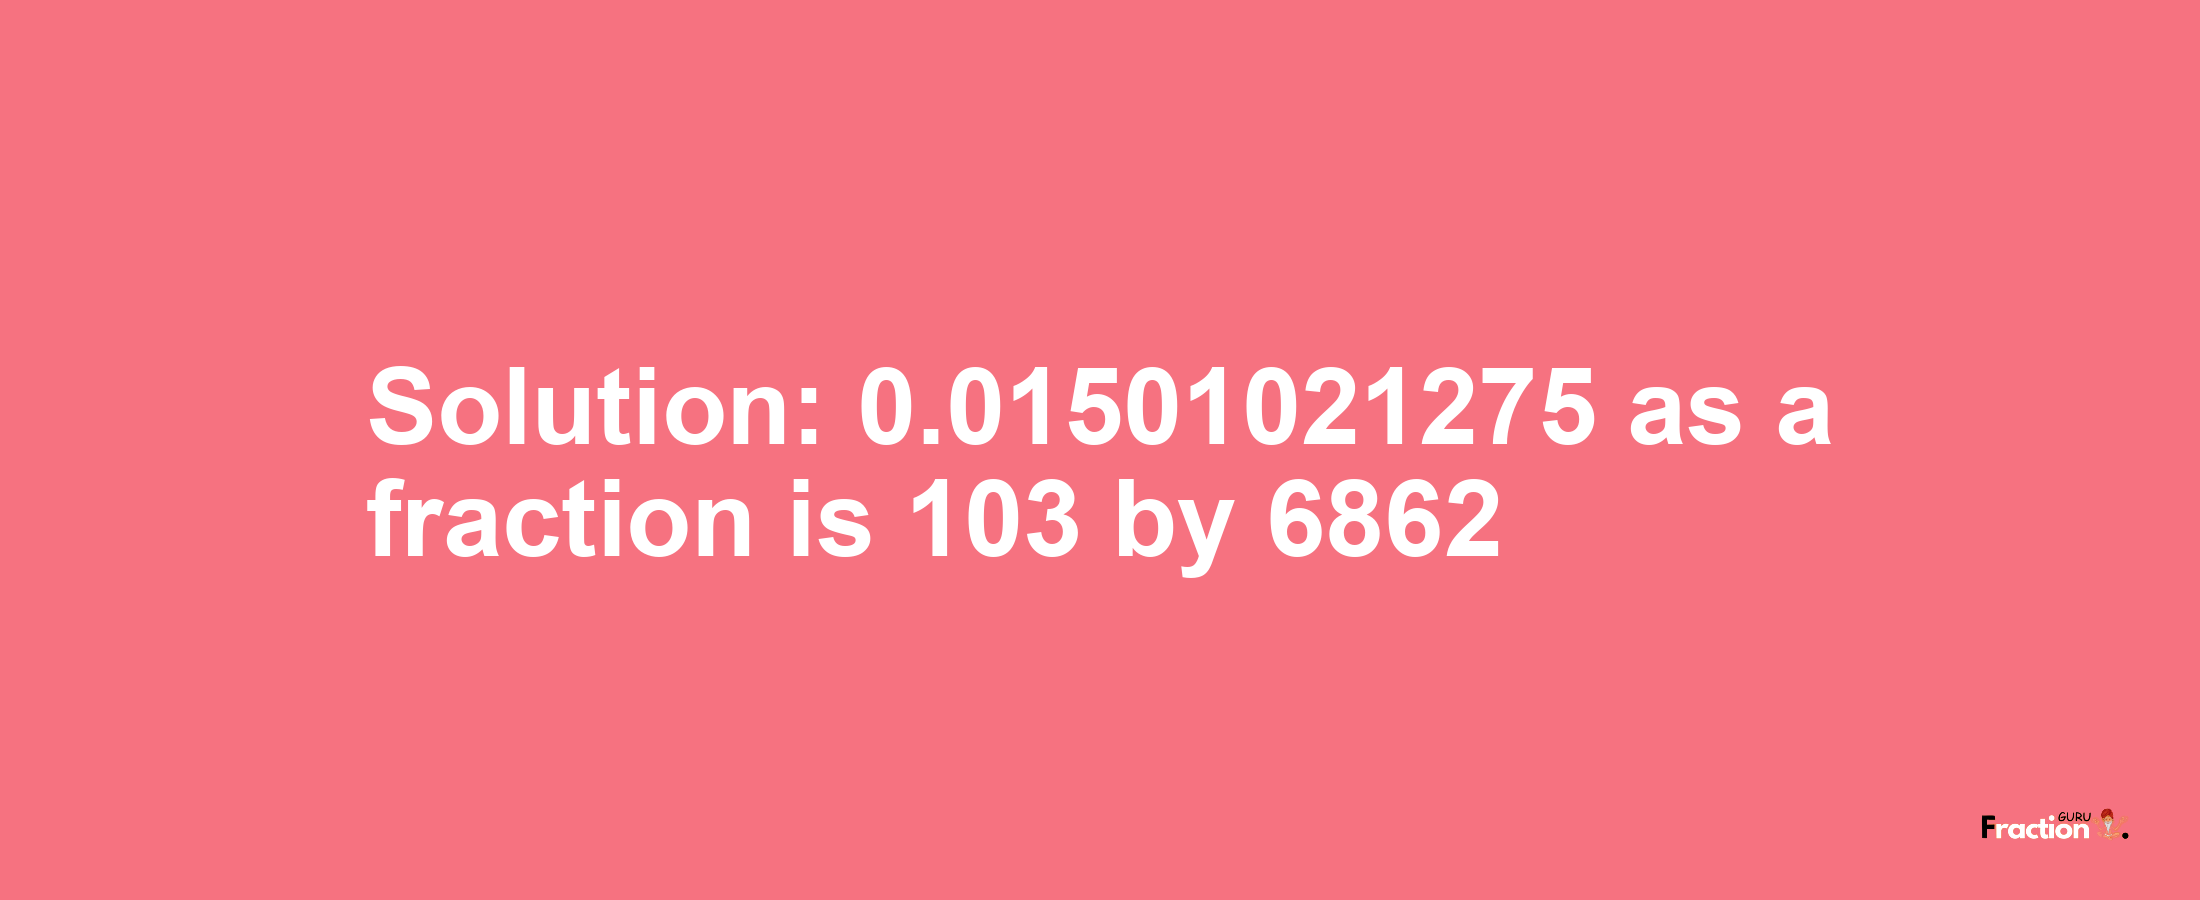 Solution:0.01501021275 as a fraction is 103/6862